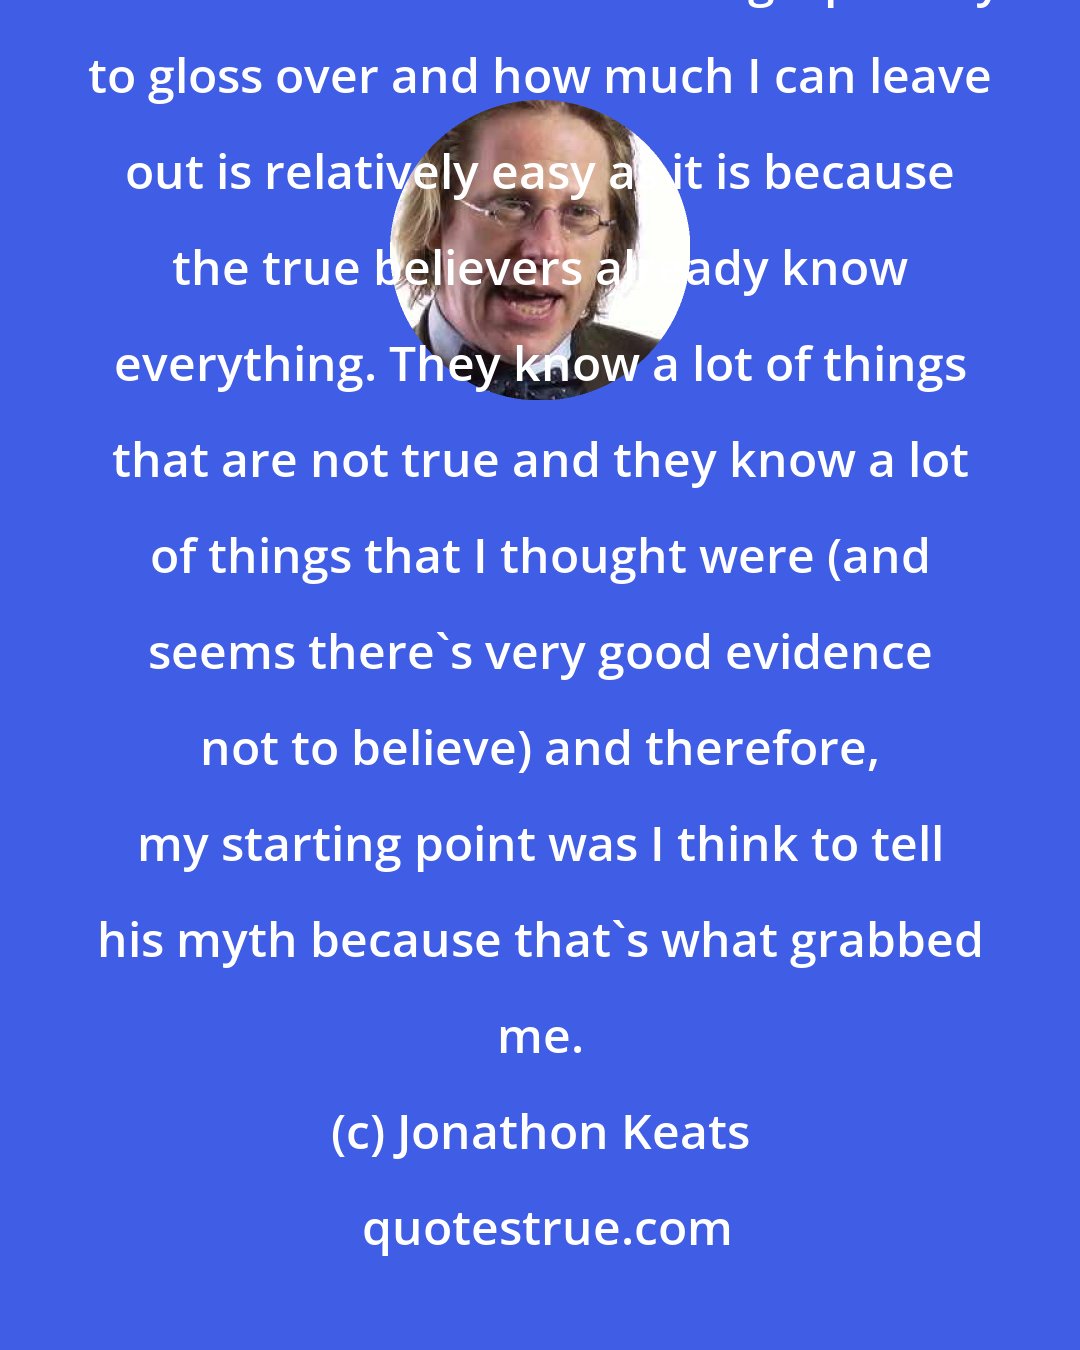 Jonathon Keats: Writing a book about [Buckminster Fuller] in the sense of deciding how much to - how much biographically to gloss over and how much I can leave out is relatively easy as it is because the true believers already know everything. They know a lot of things that are not true and they know a lot of things that I thought were (and seems there's very good evidence not to believe) and therefore, my starting point was I think to tell his myth because that's what grabbed me.